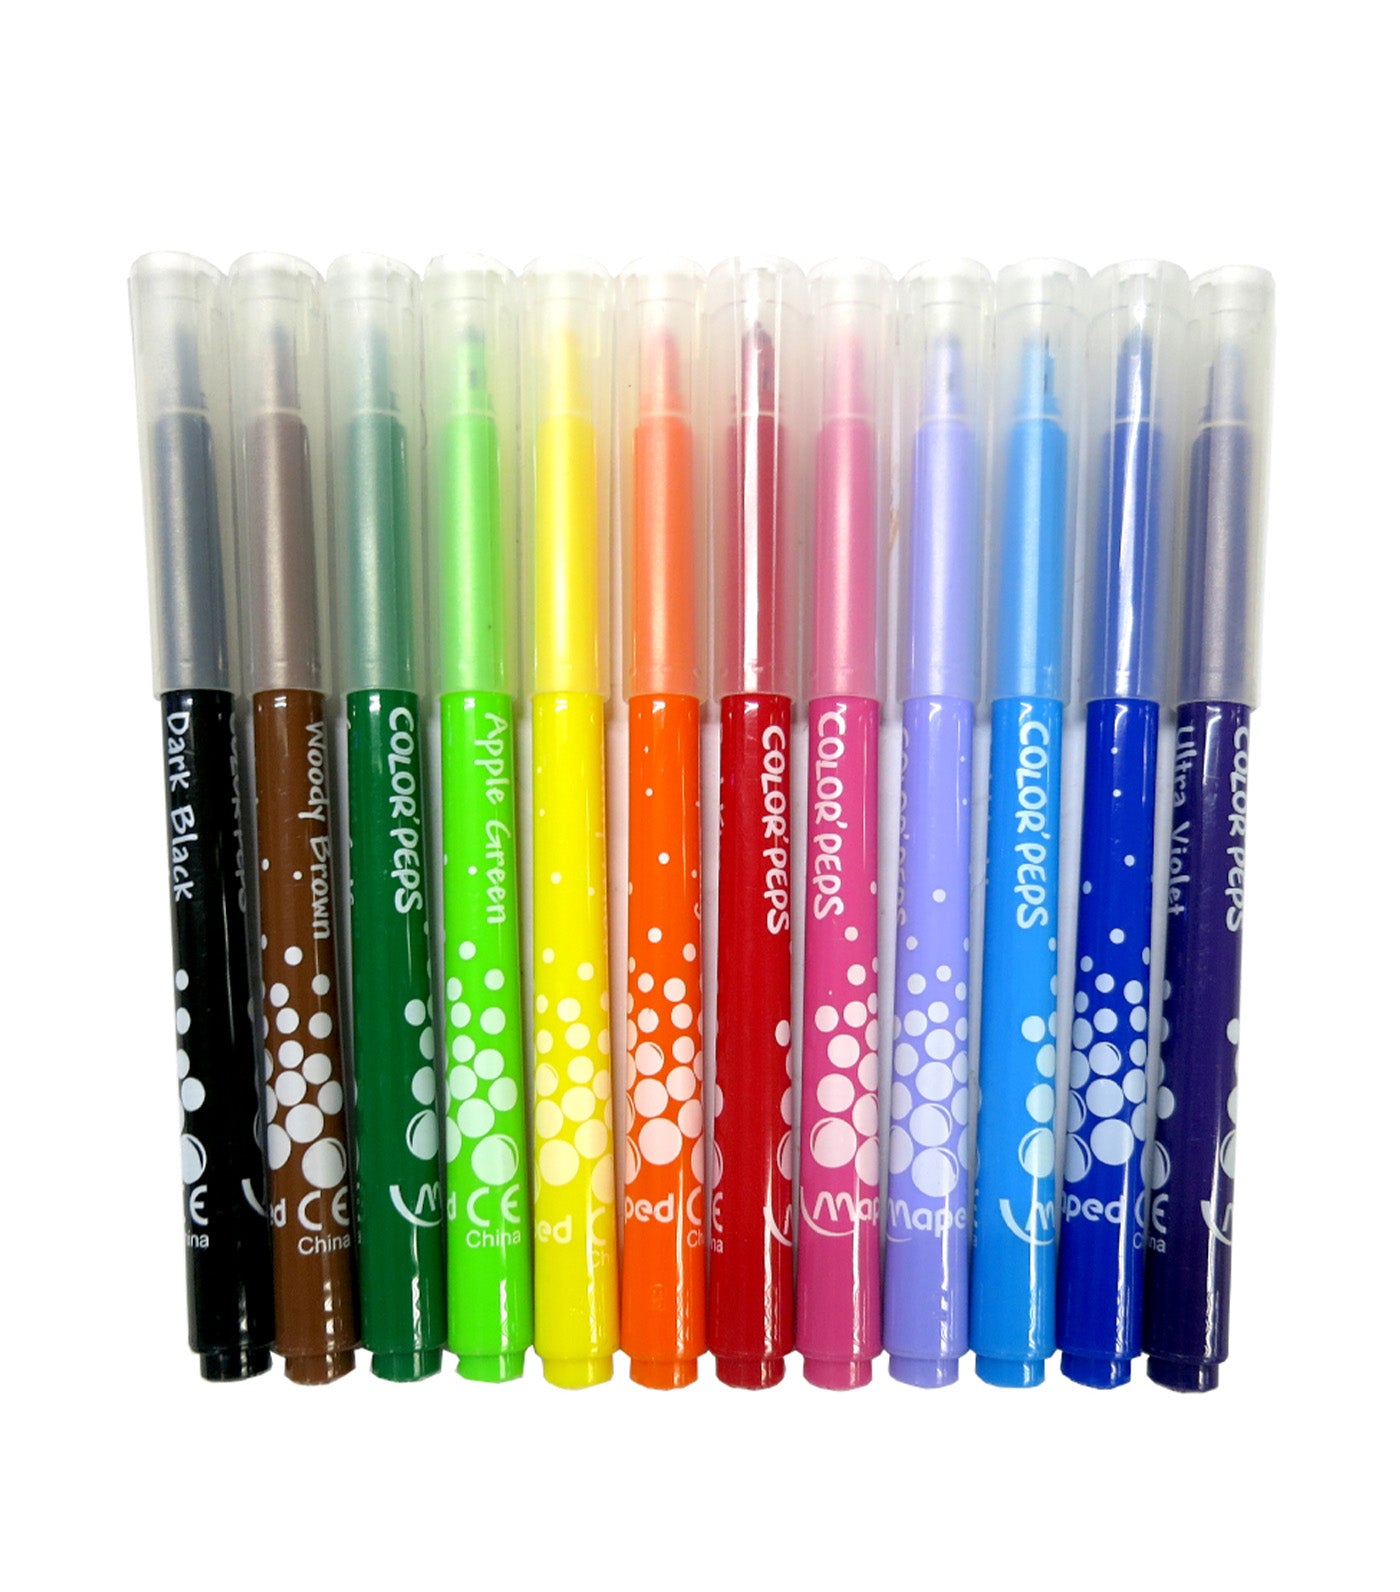 Color'Peps Long Life Colored Markers x 12